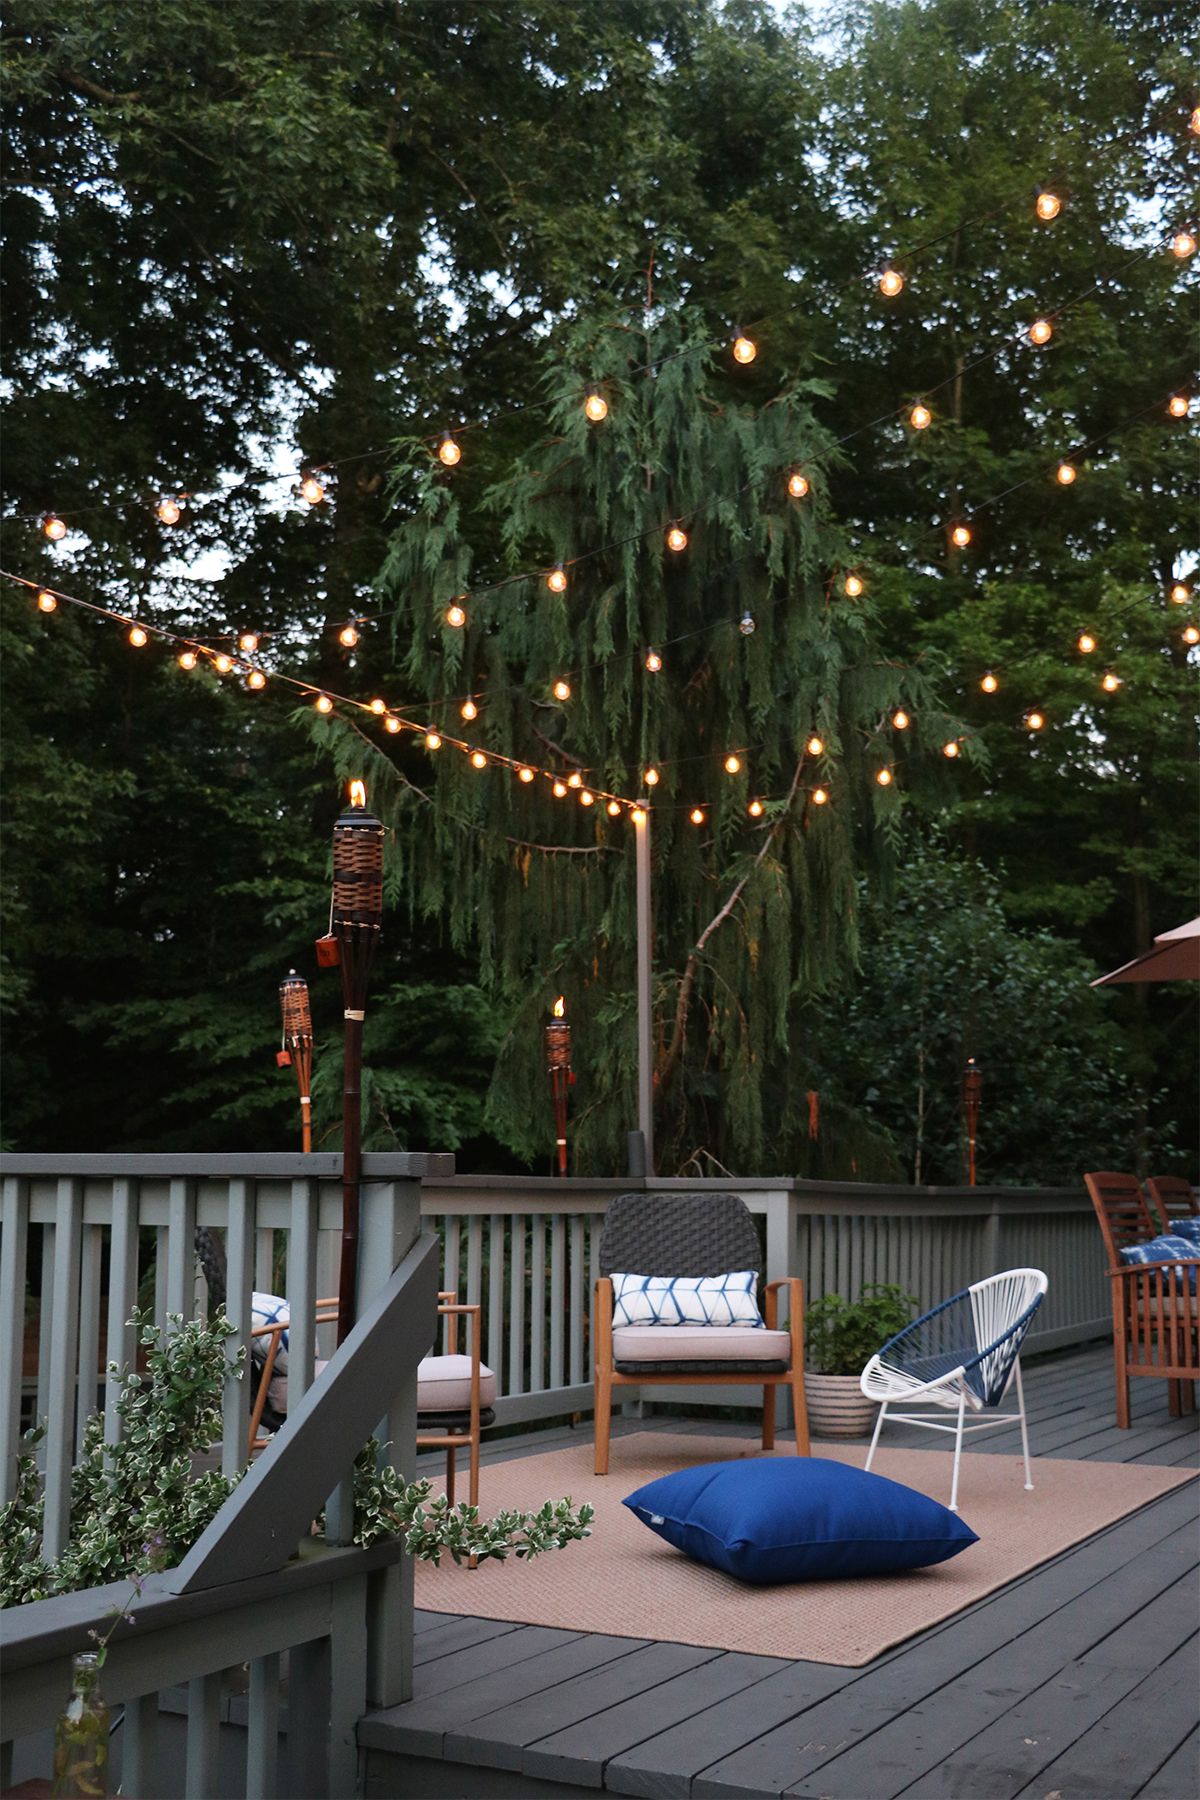 How to Hang Outdoor String Lights - The Home Depot